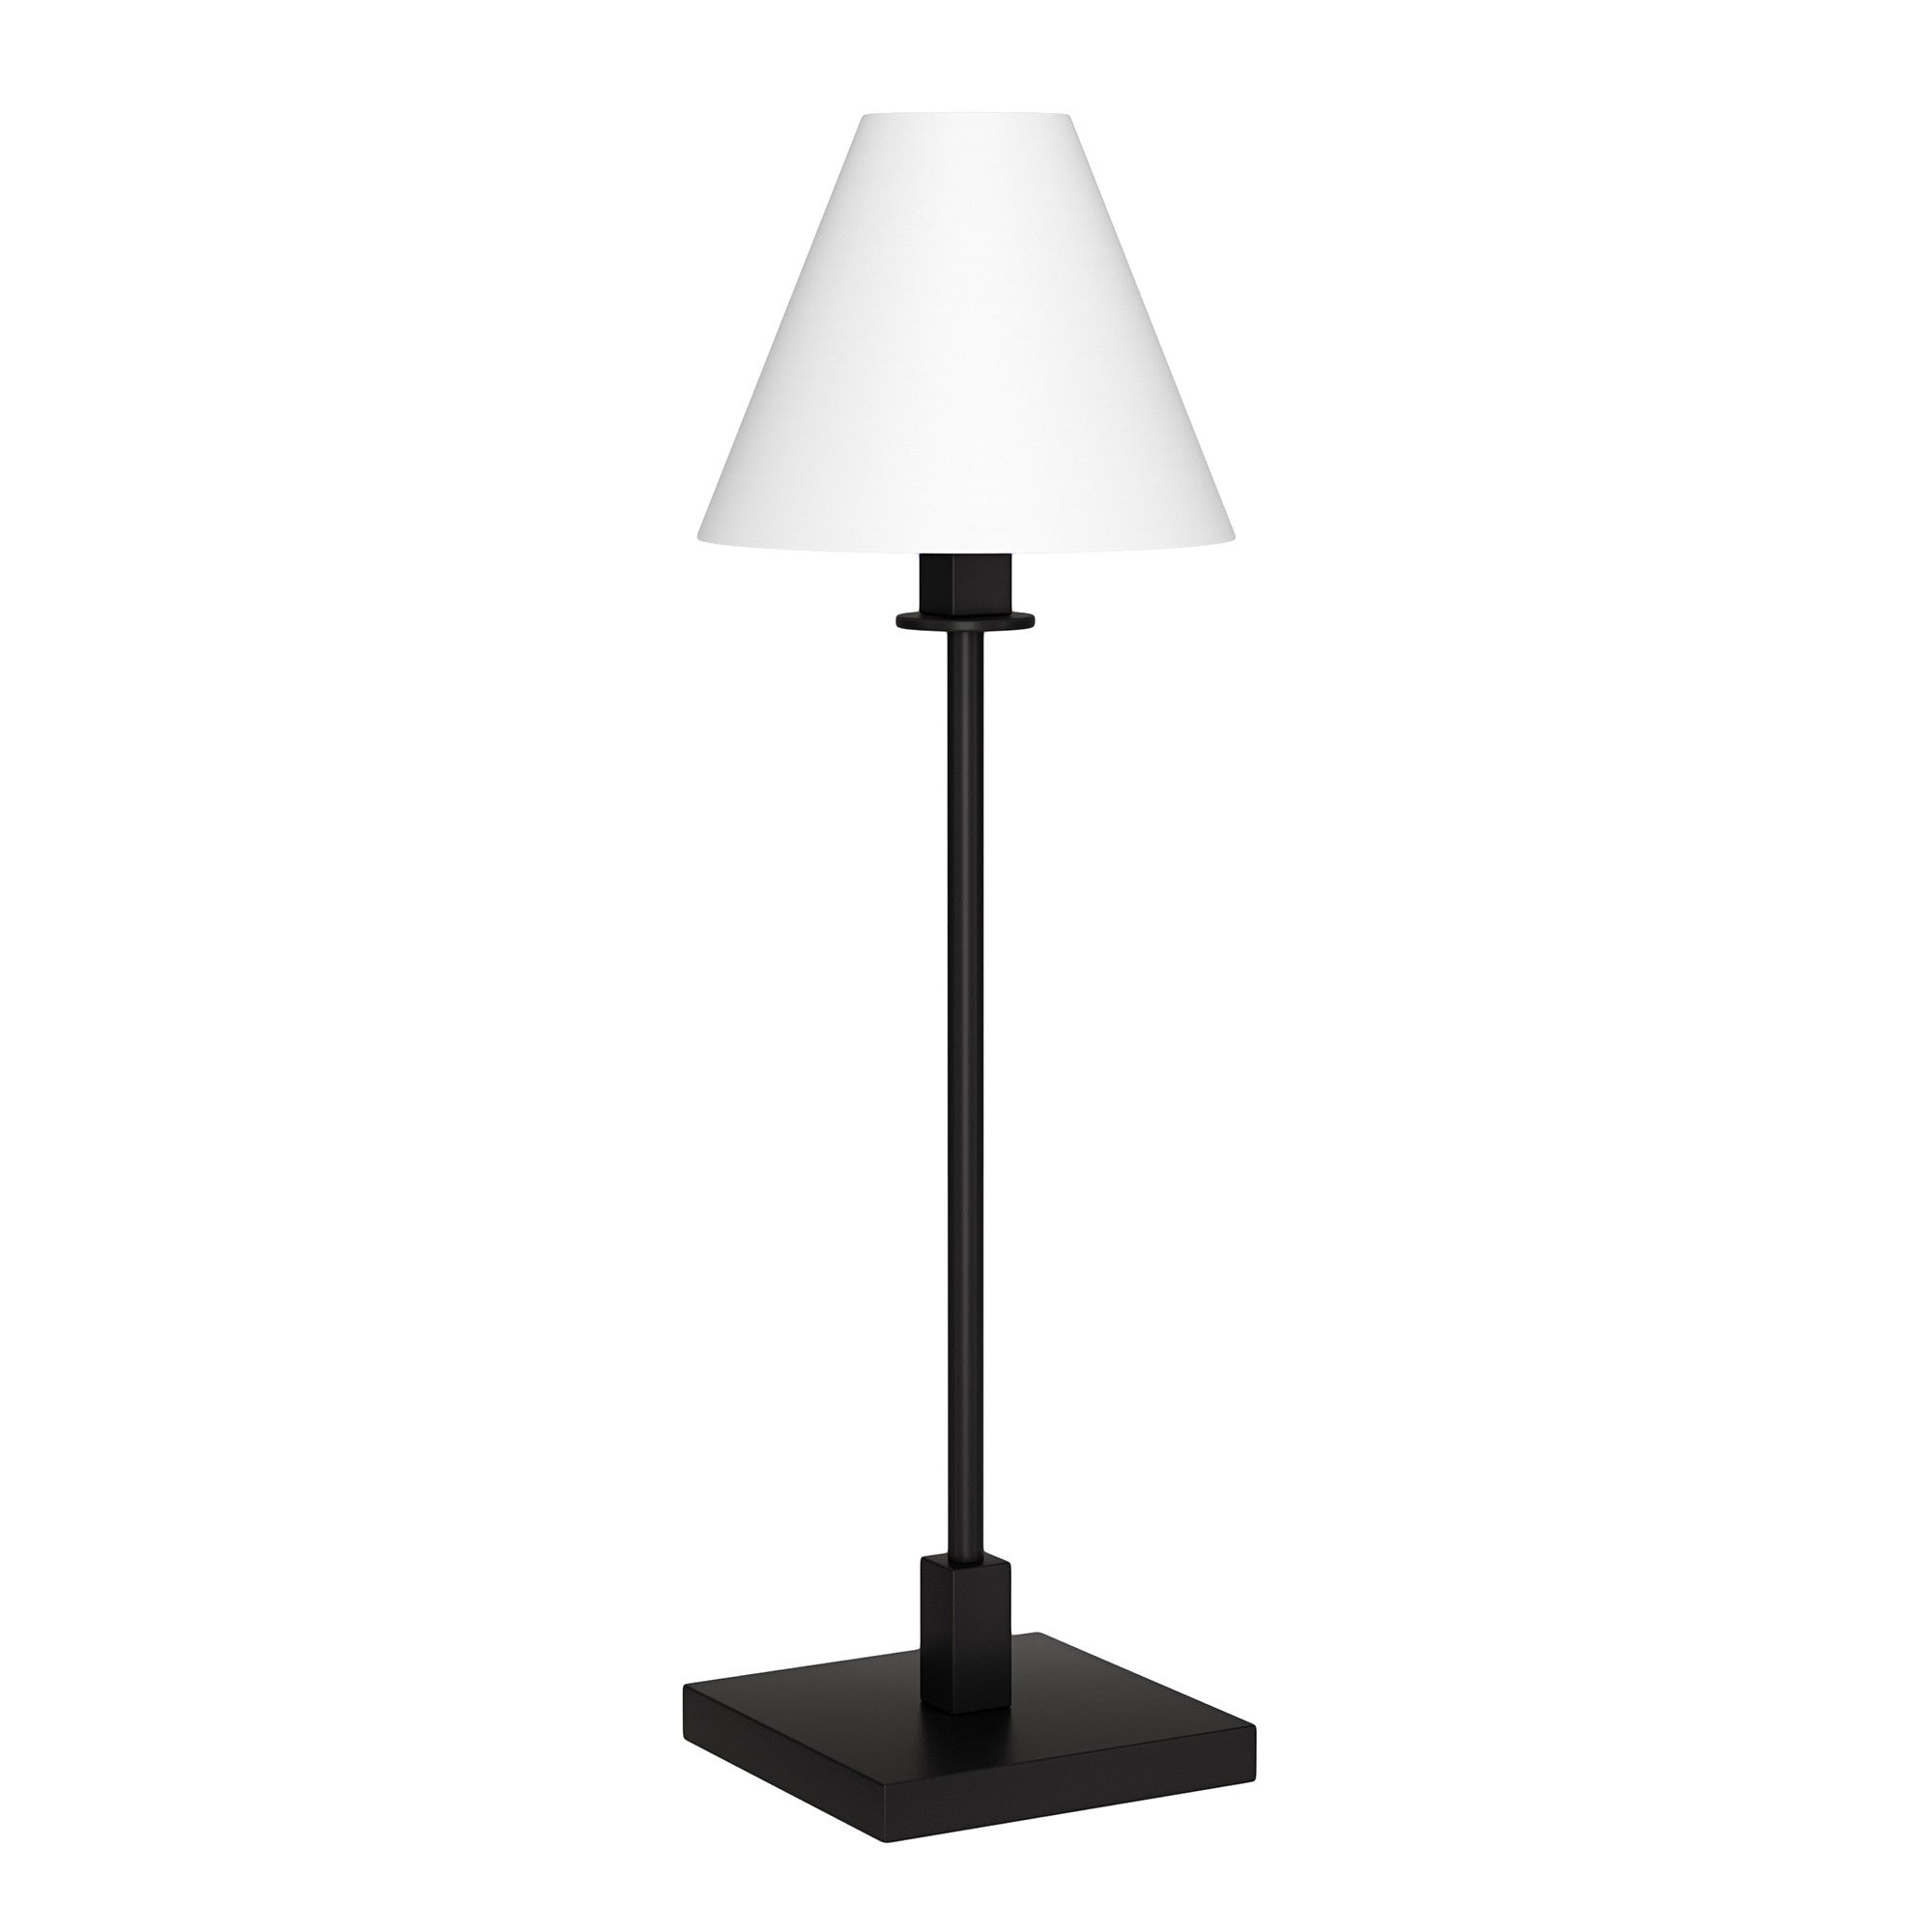 28" Black Metal Candlestick Table Lamp With White Cone Shade